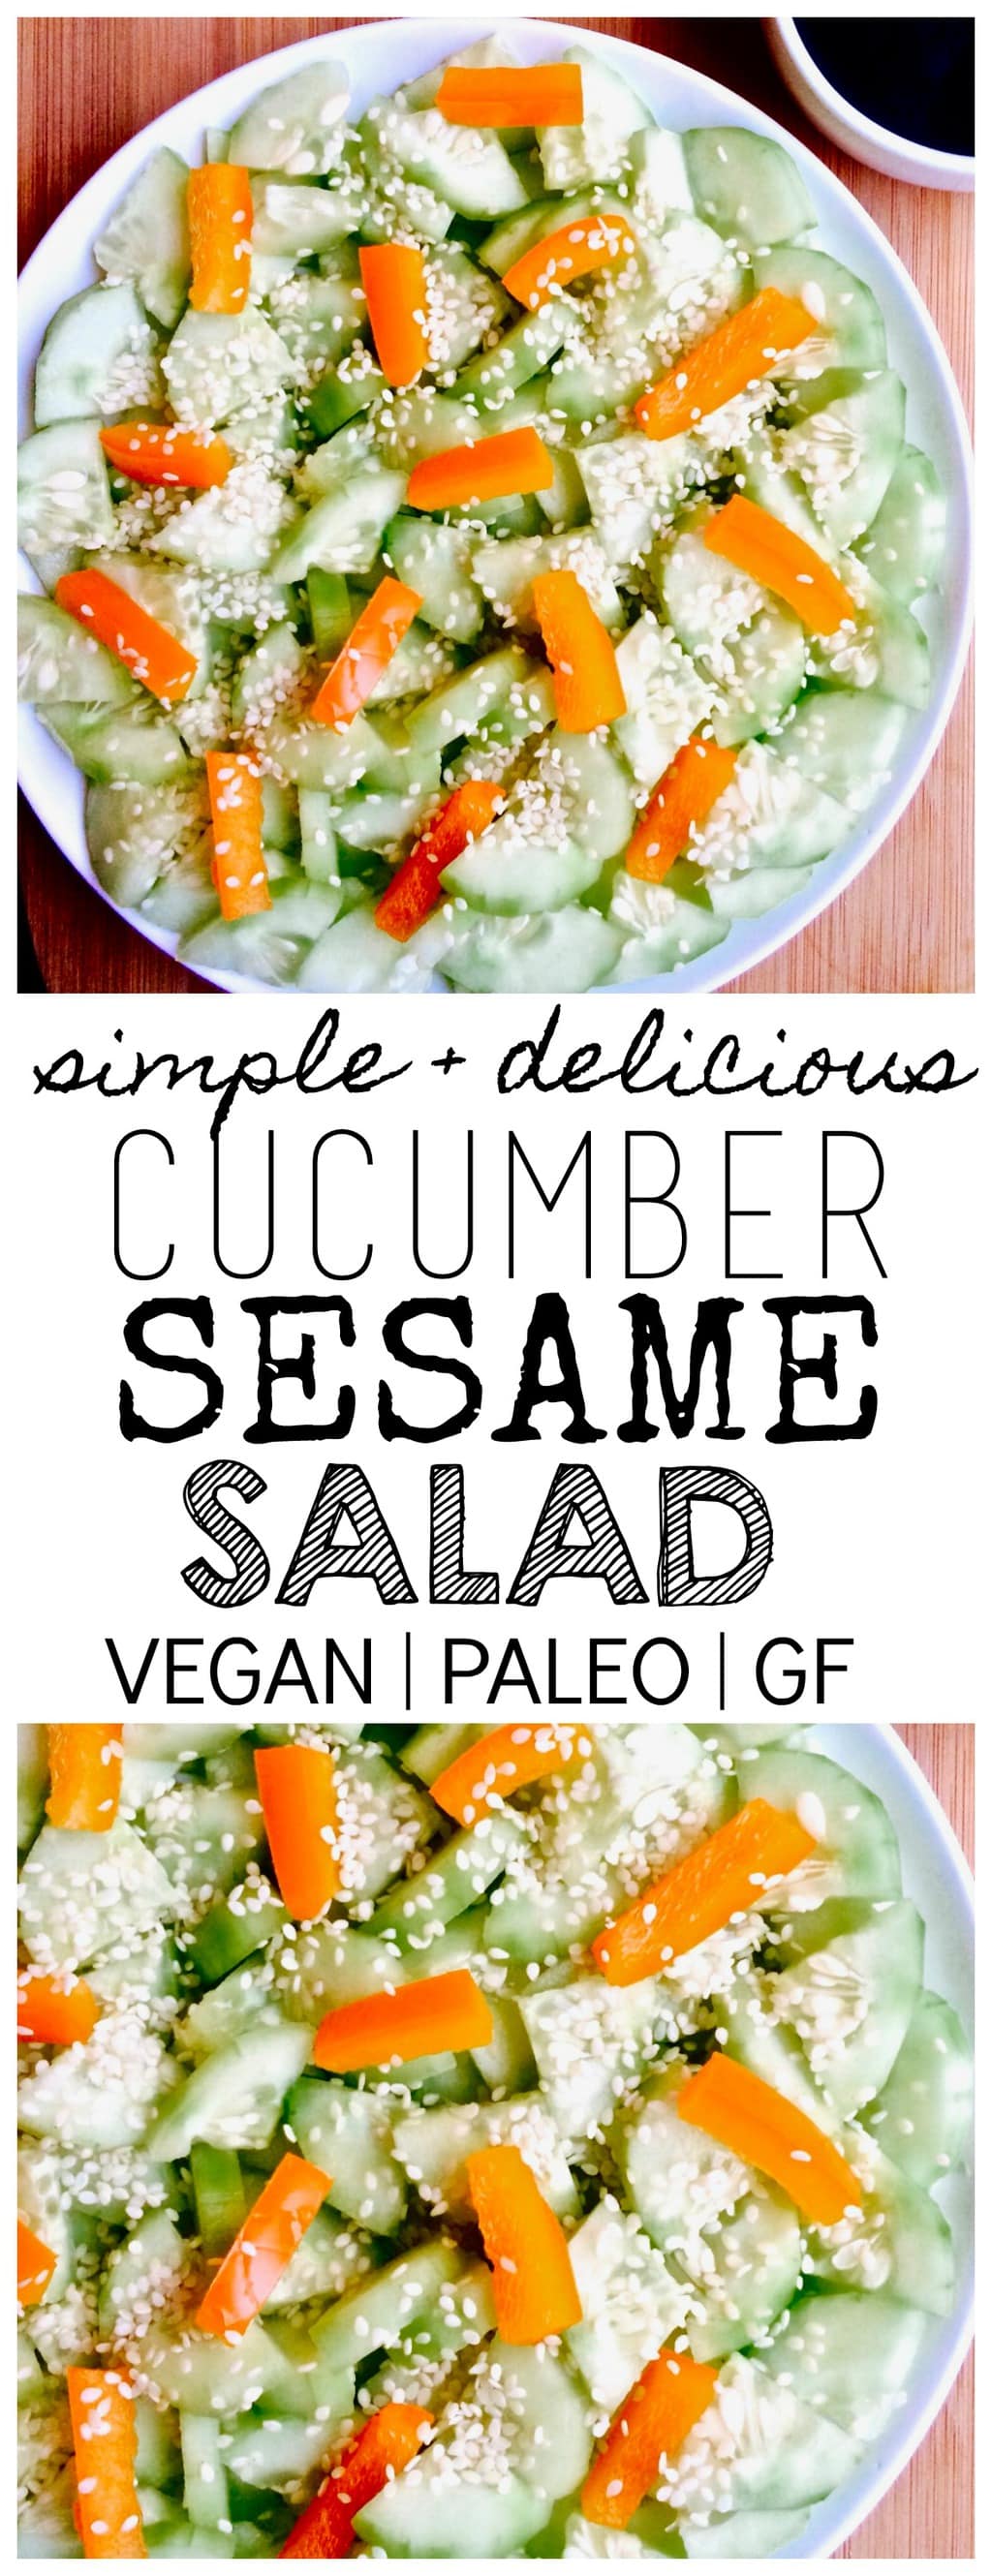 This Simple Cucumber Sesame Salad is so delicious and easy to make!! It's vegan, paleo, gluten-free, oil-free, sugar-free, and loaded with nutrition.